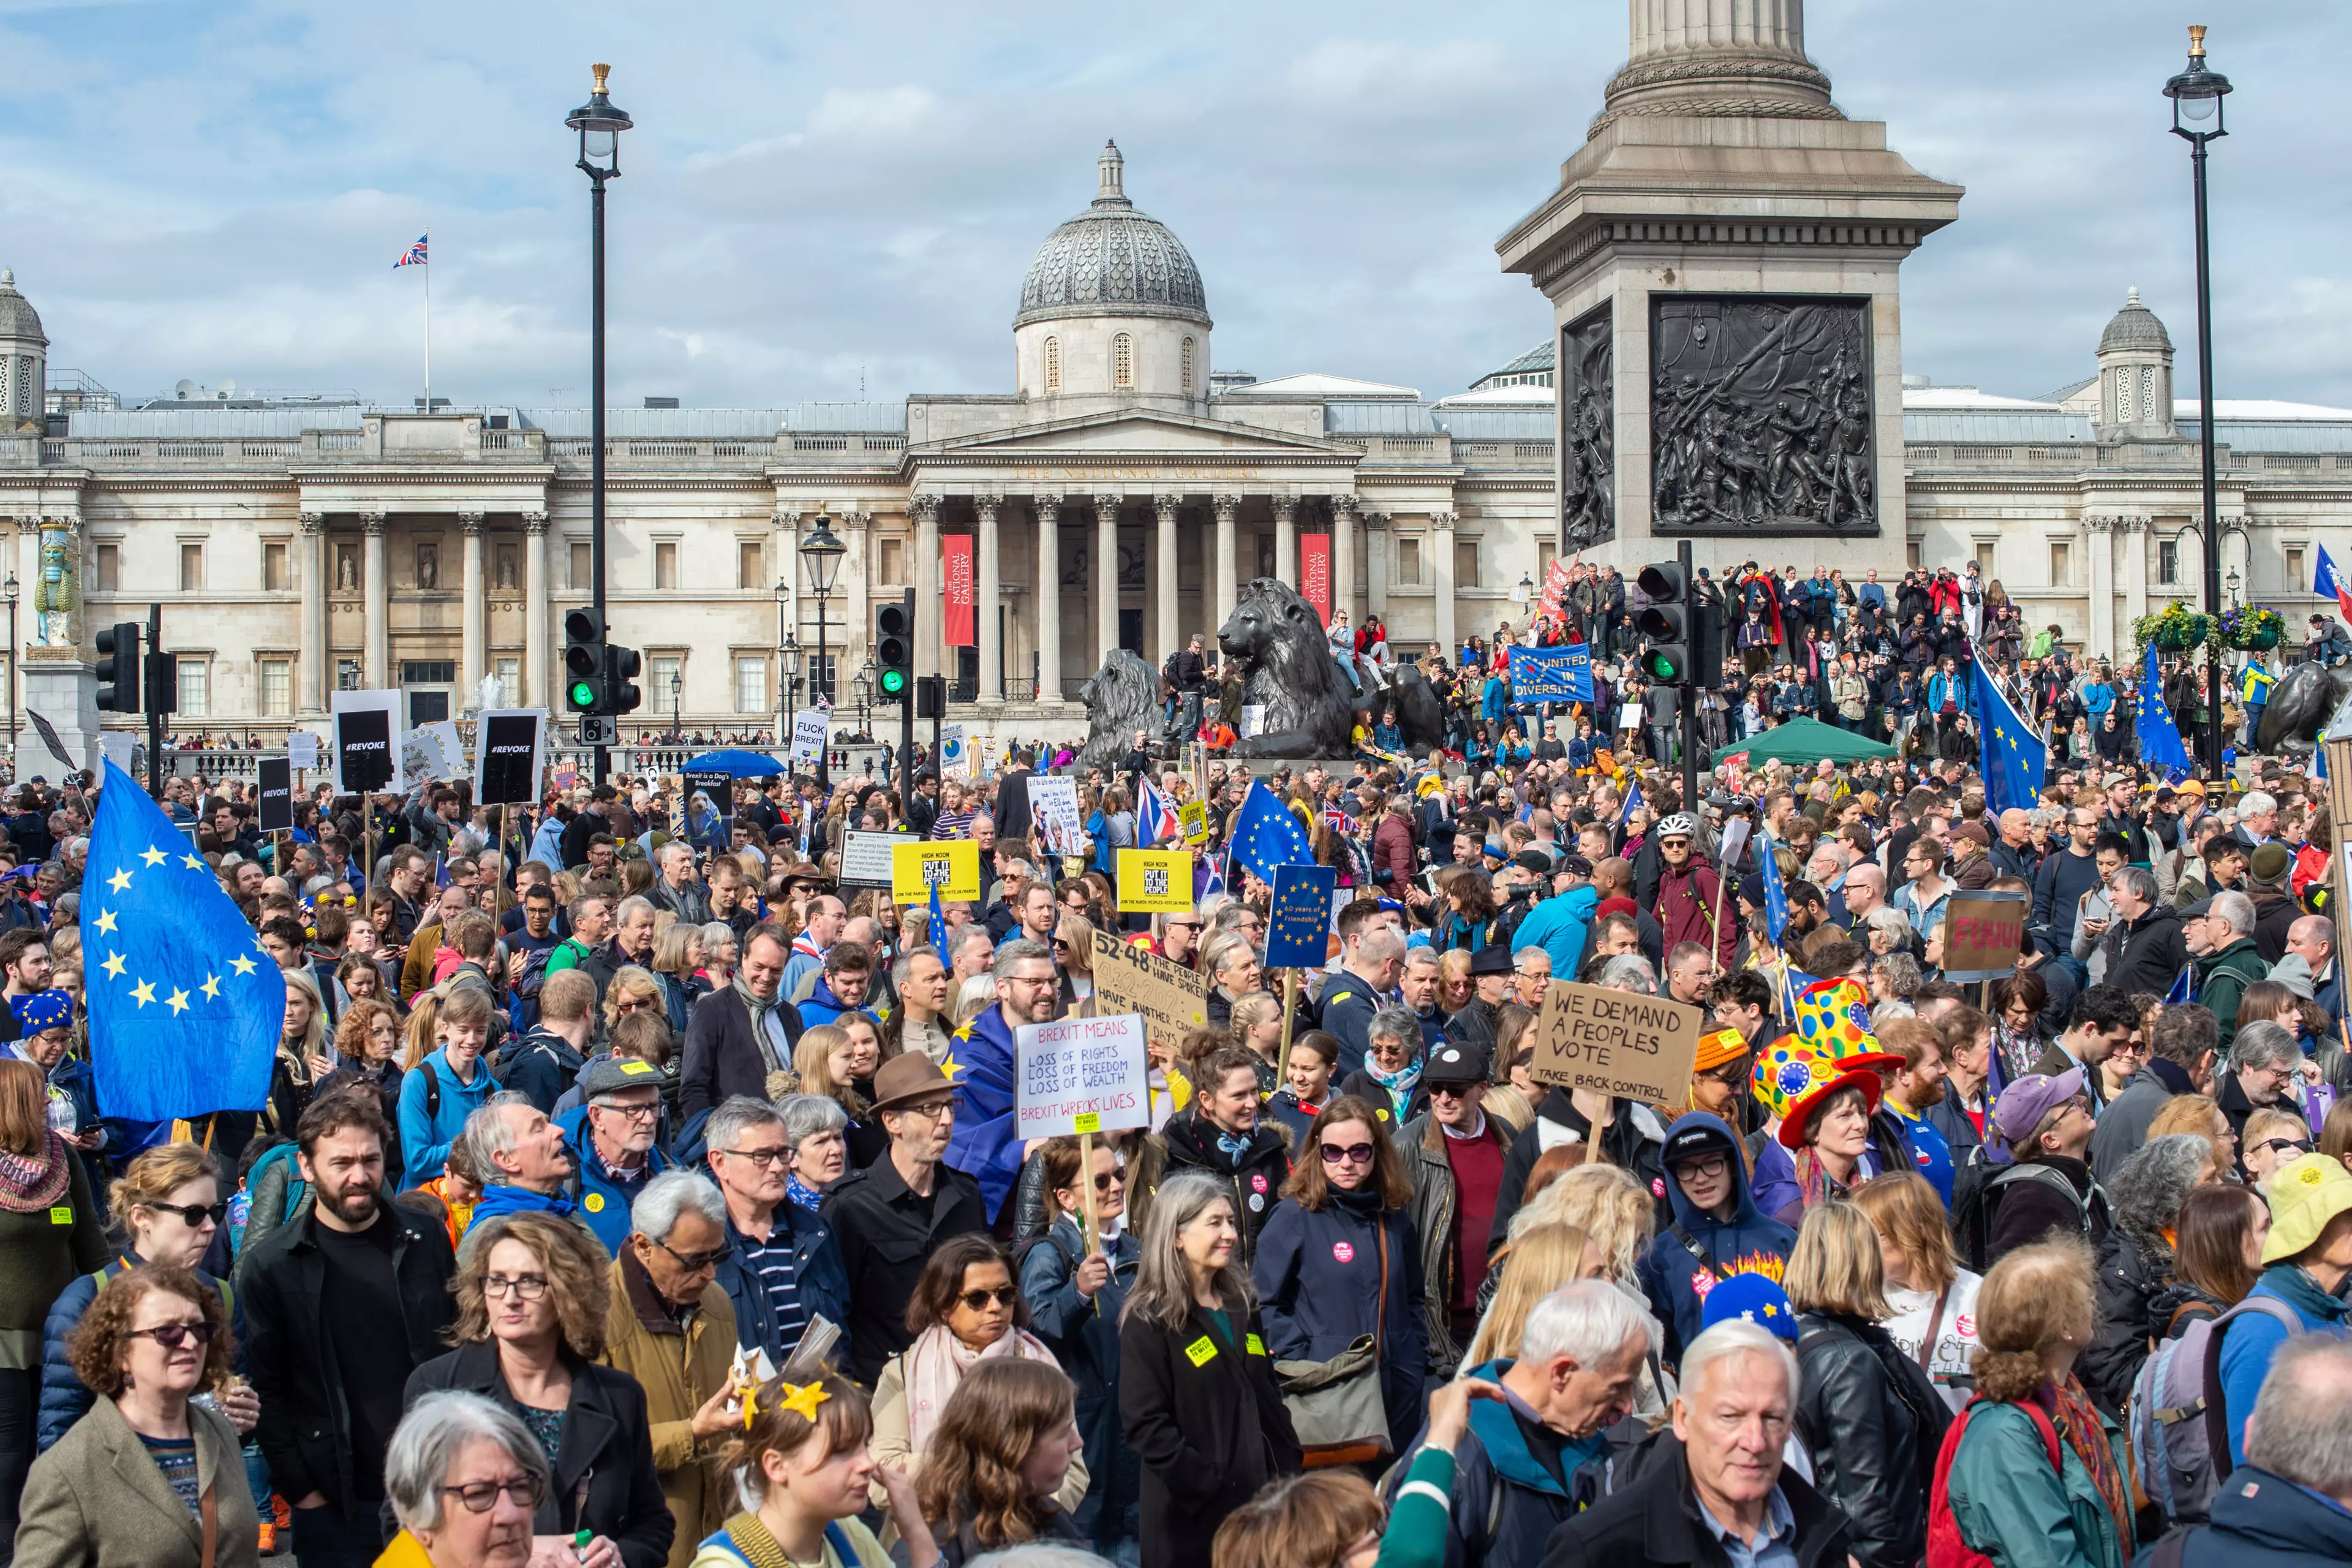 Around a million people protested in London this weekend.